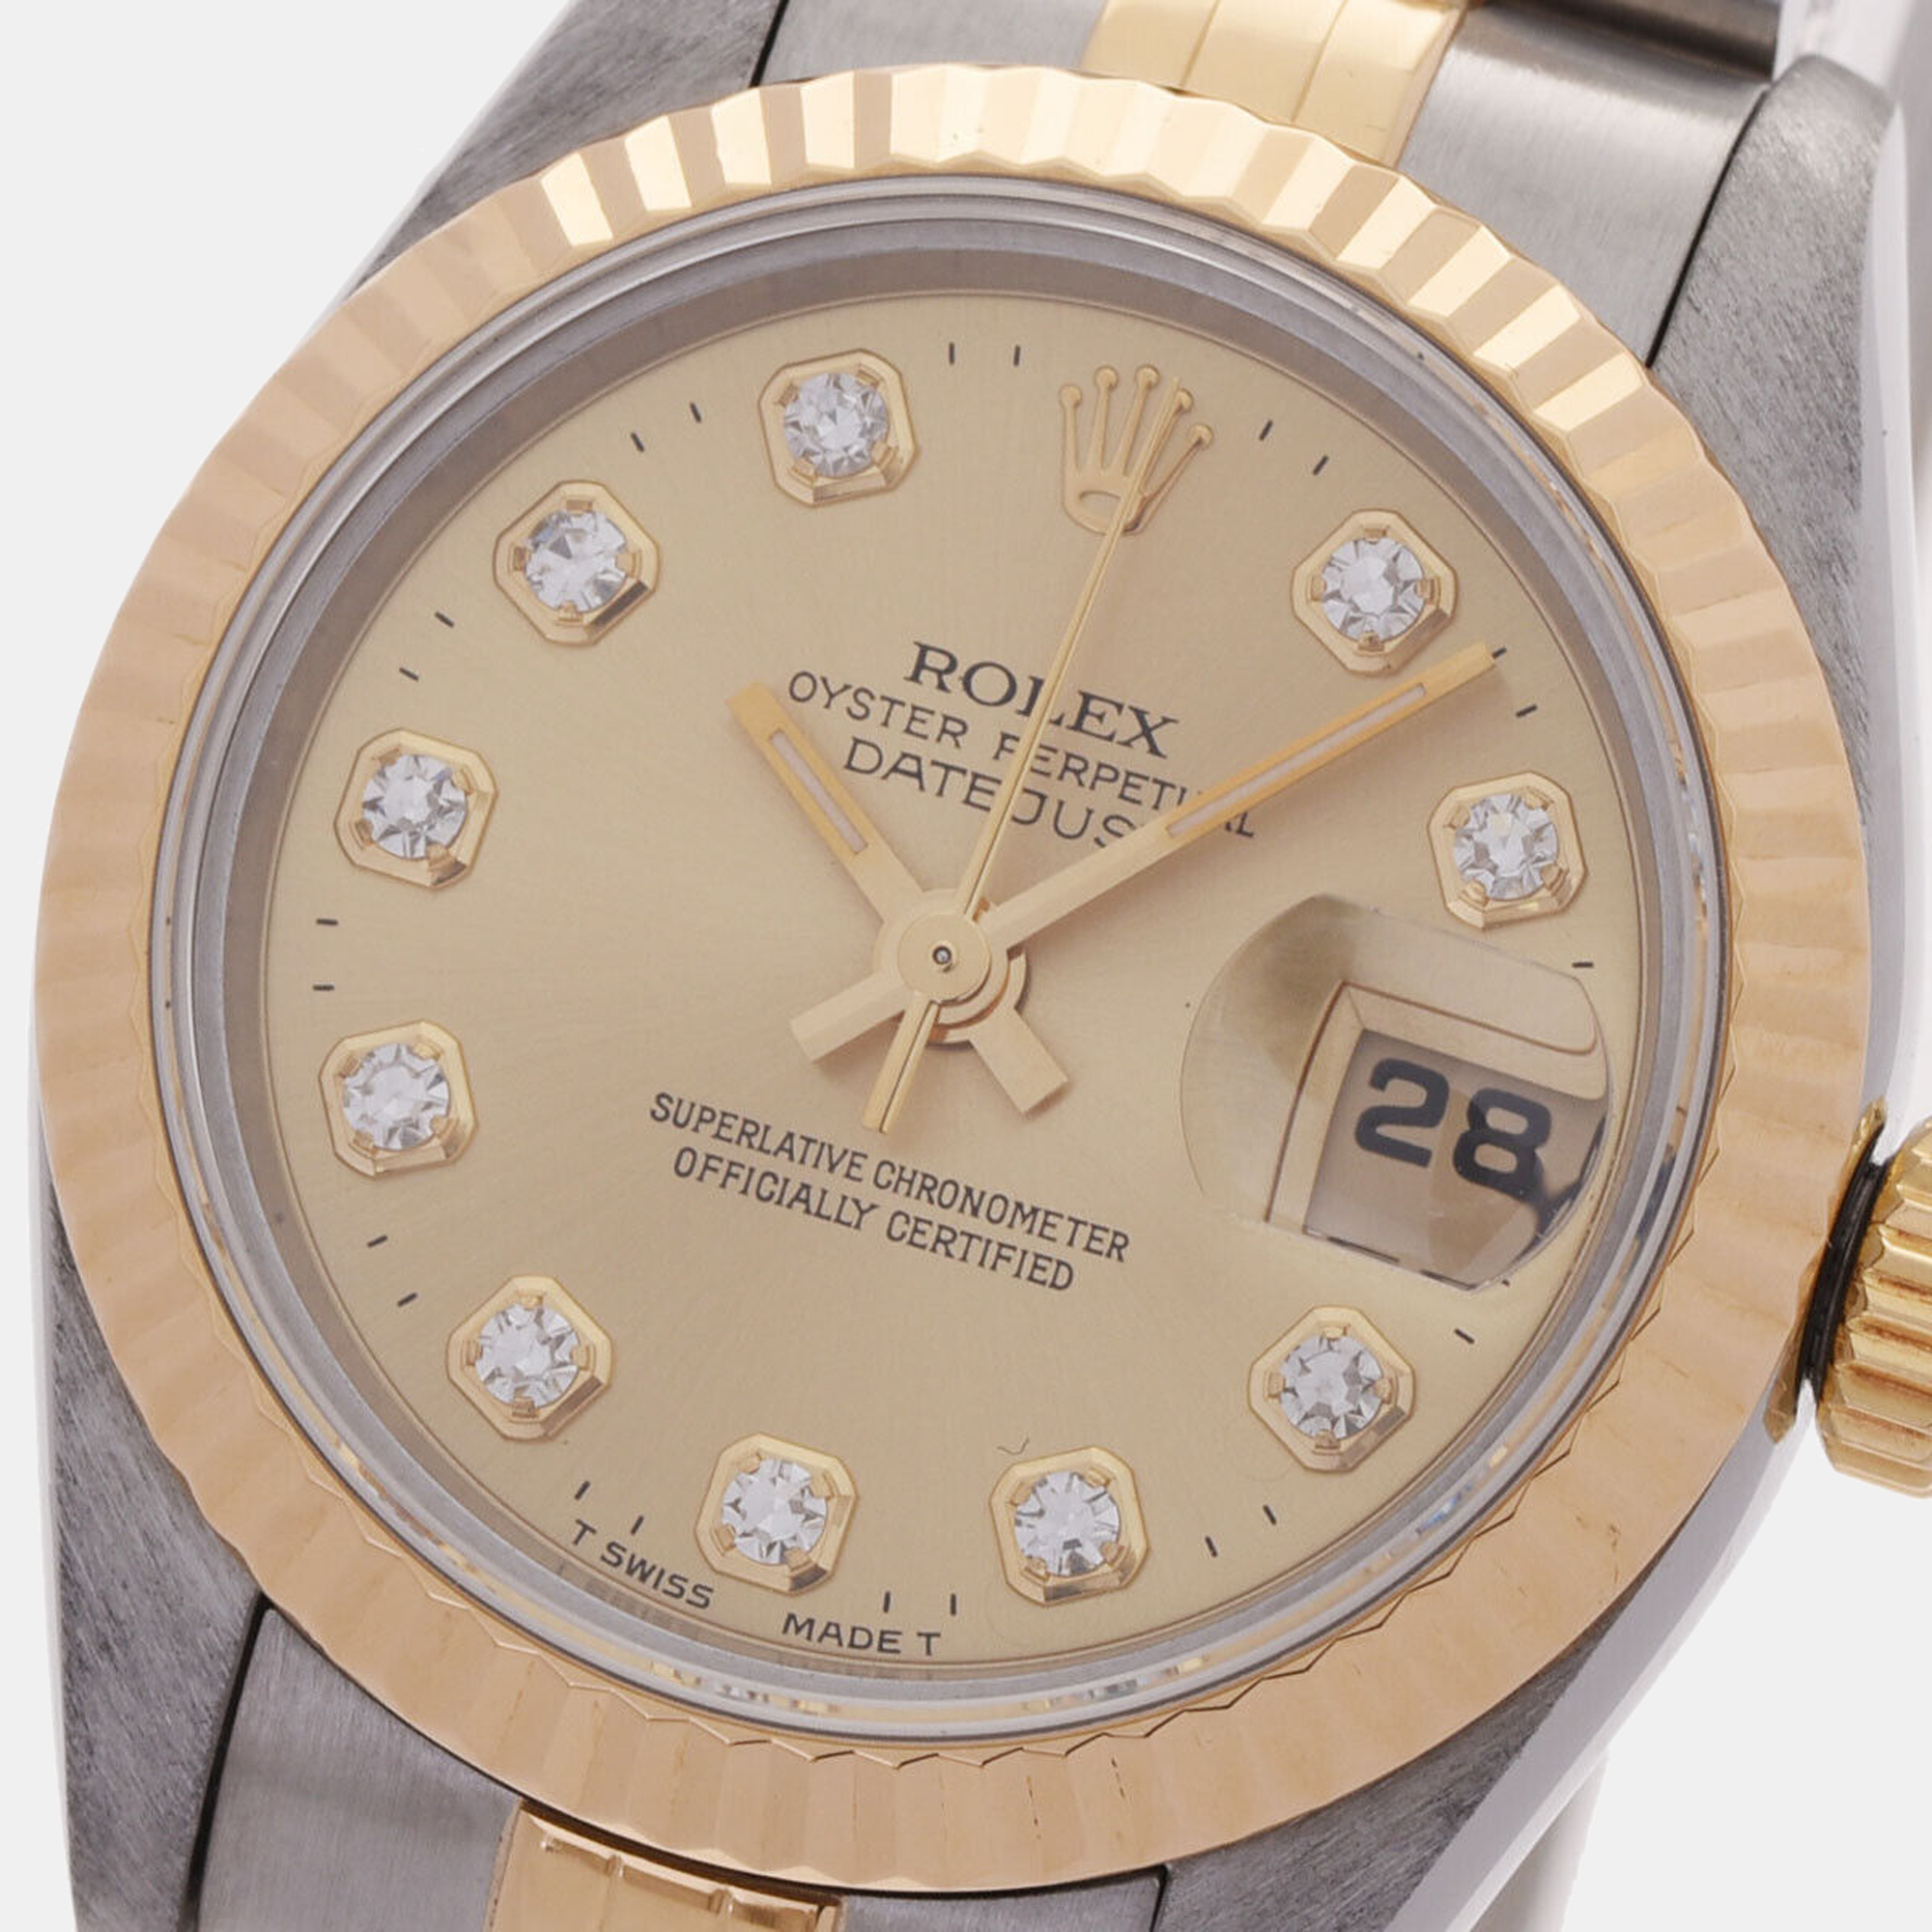 

Rolex Champagne Diamonds 18K Yellow Gold And Stainless Steel Datejust 69173 Women's Wristwatch 26 mm